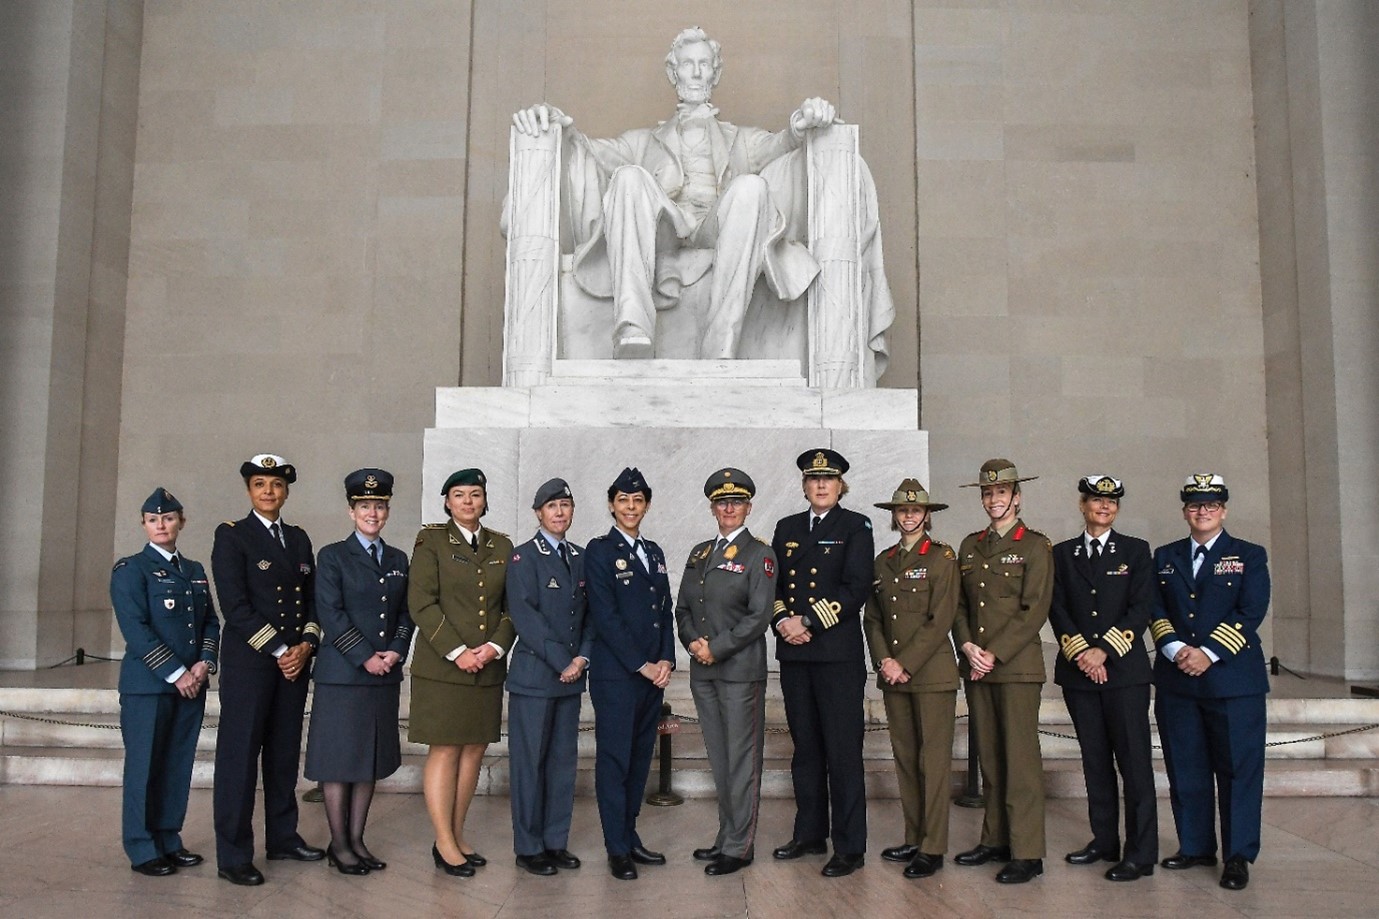 Image shows personnel standing by statue of Abraham Lincoln at Washington DC.